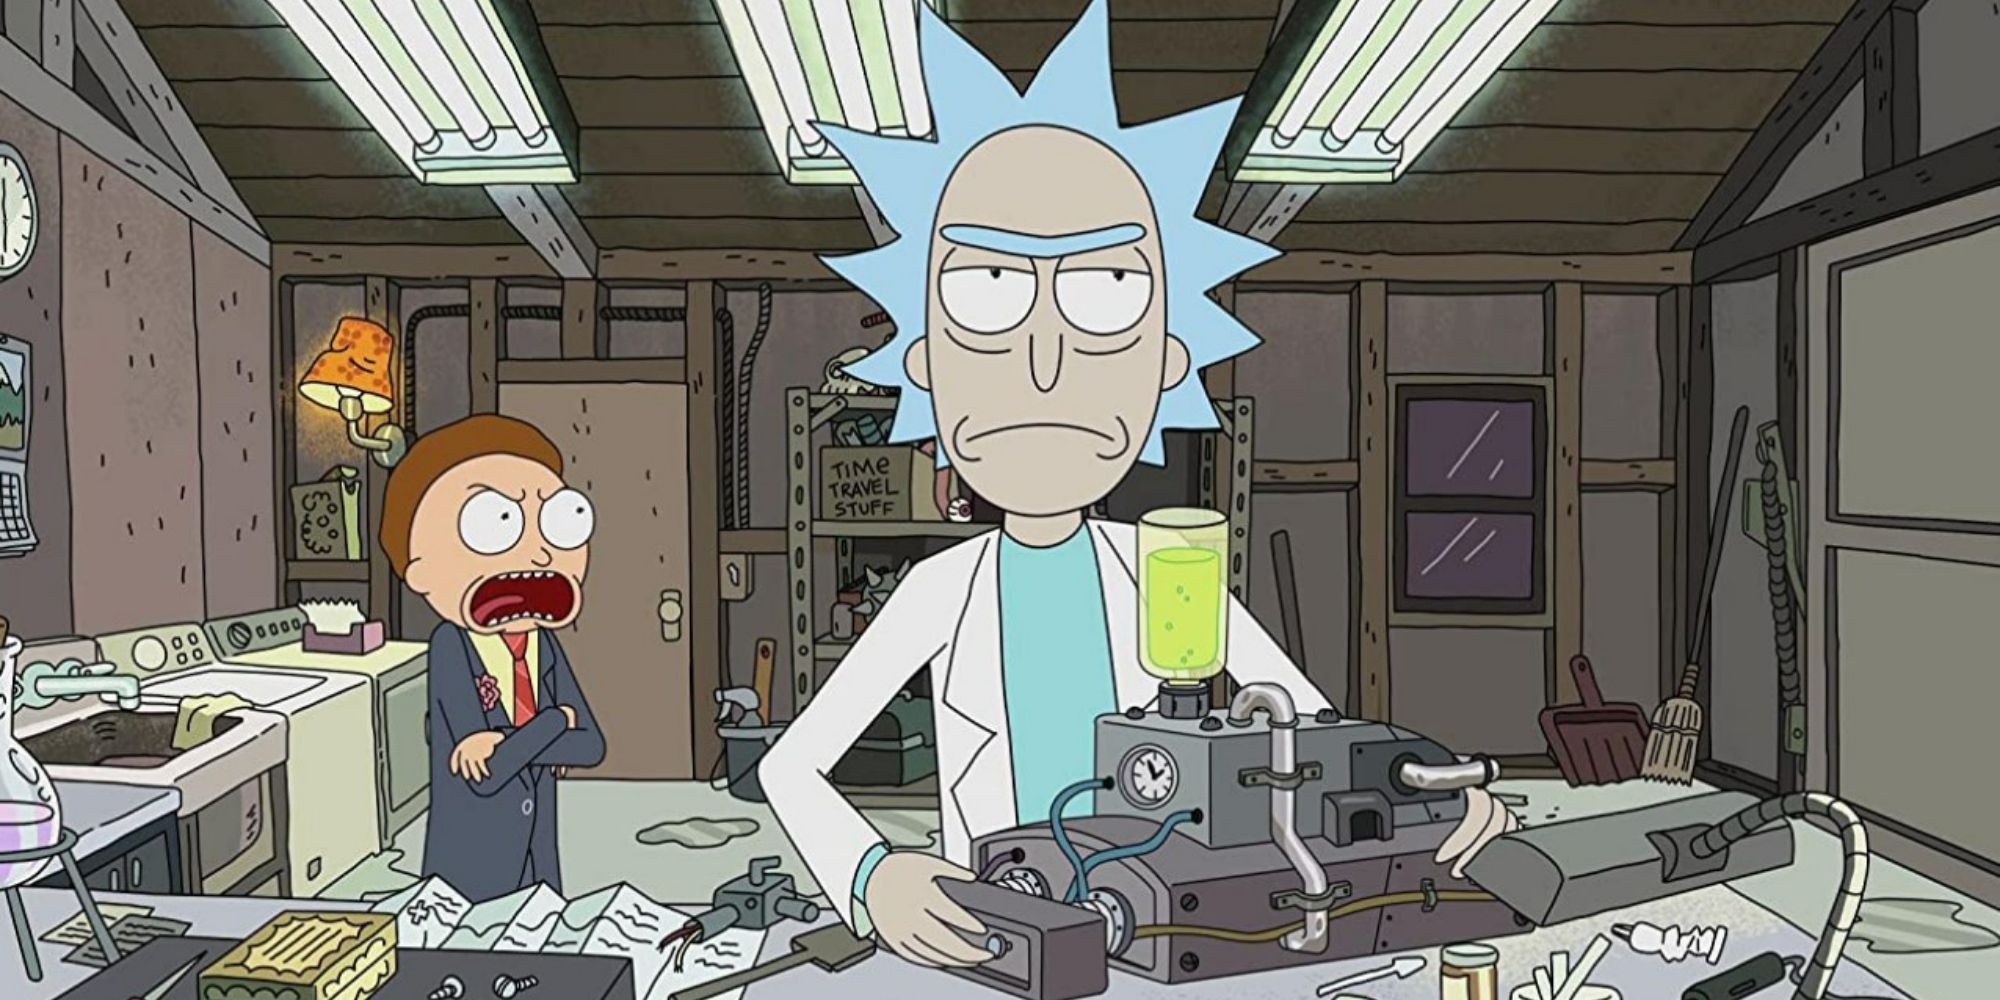 Rick works on a device in the garage while Morty yells at him in Rick and Morty